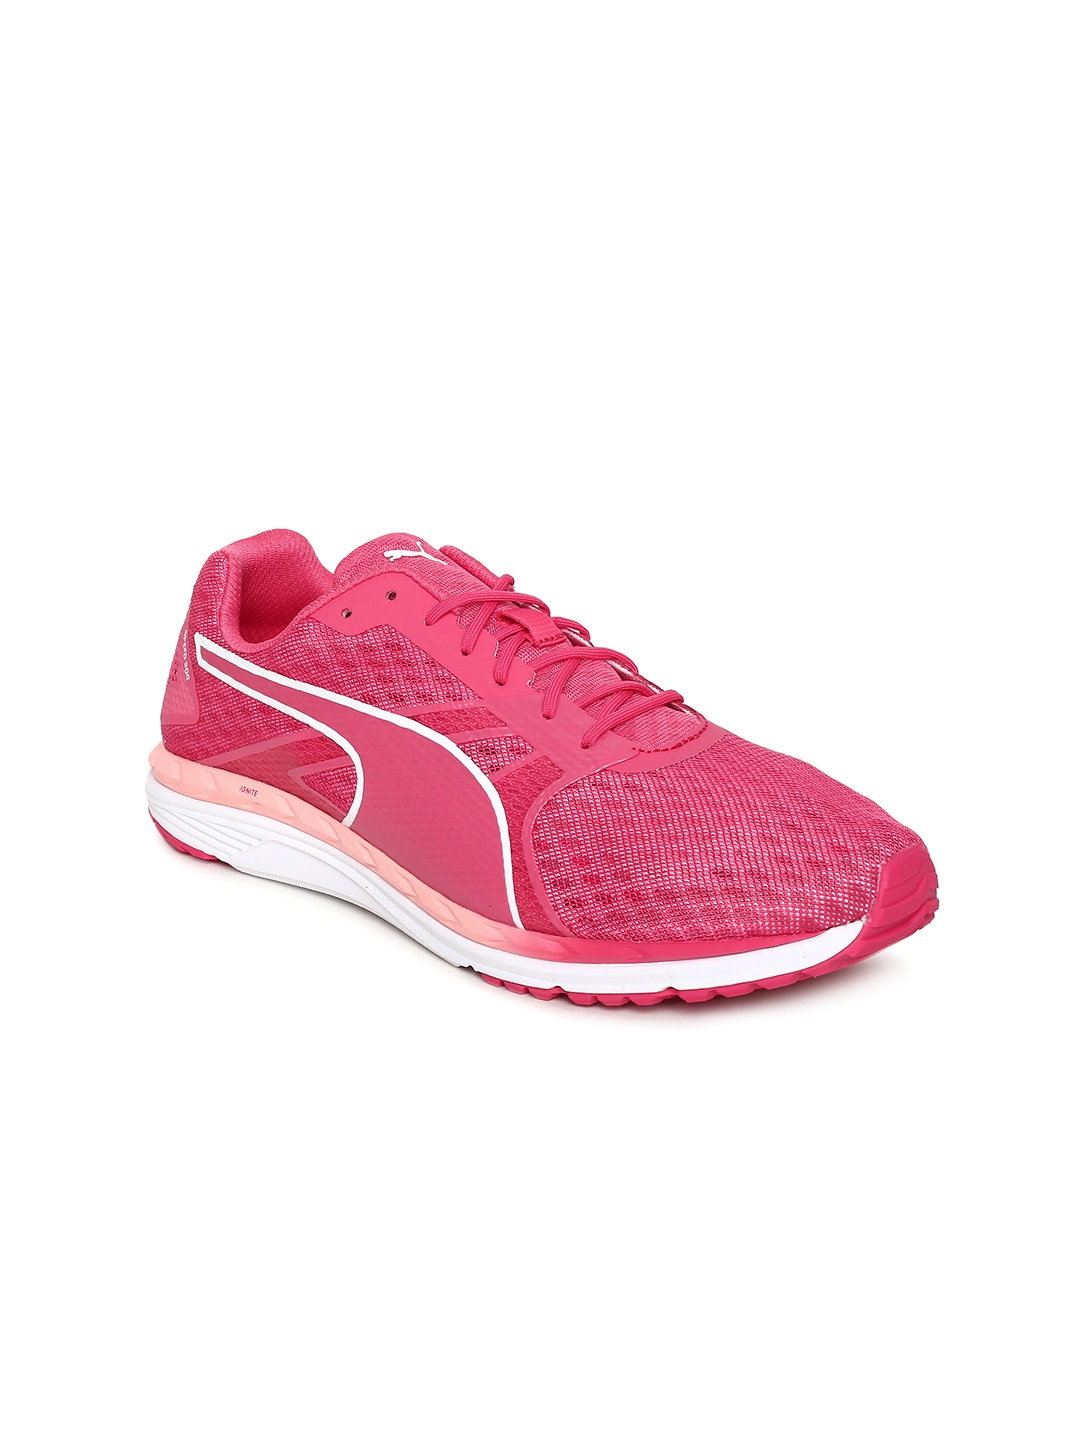 puma shoes for women pink